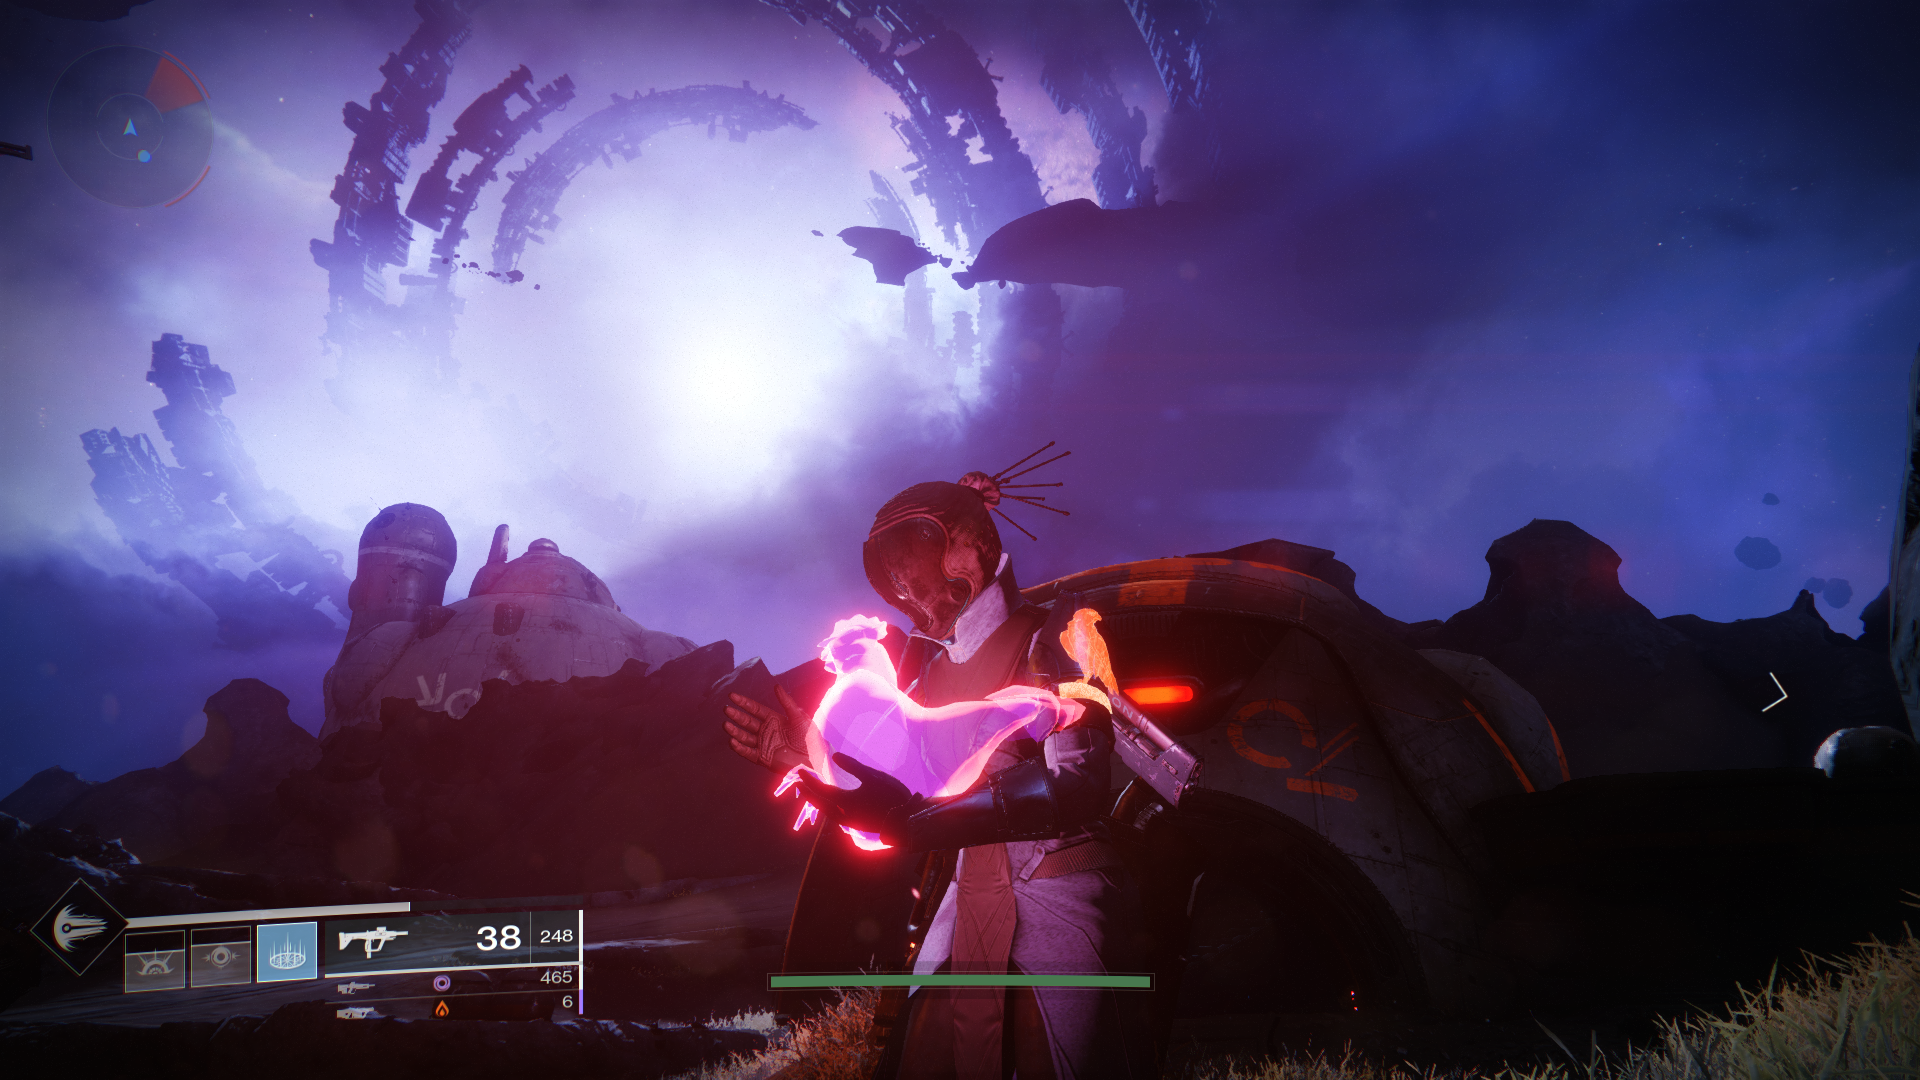 Destiny 2: Forsaken ultimate guide: tips, hints and walkthroughs for your adventures in space